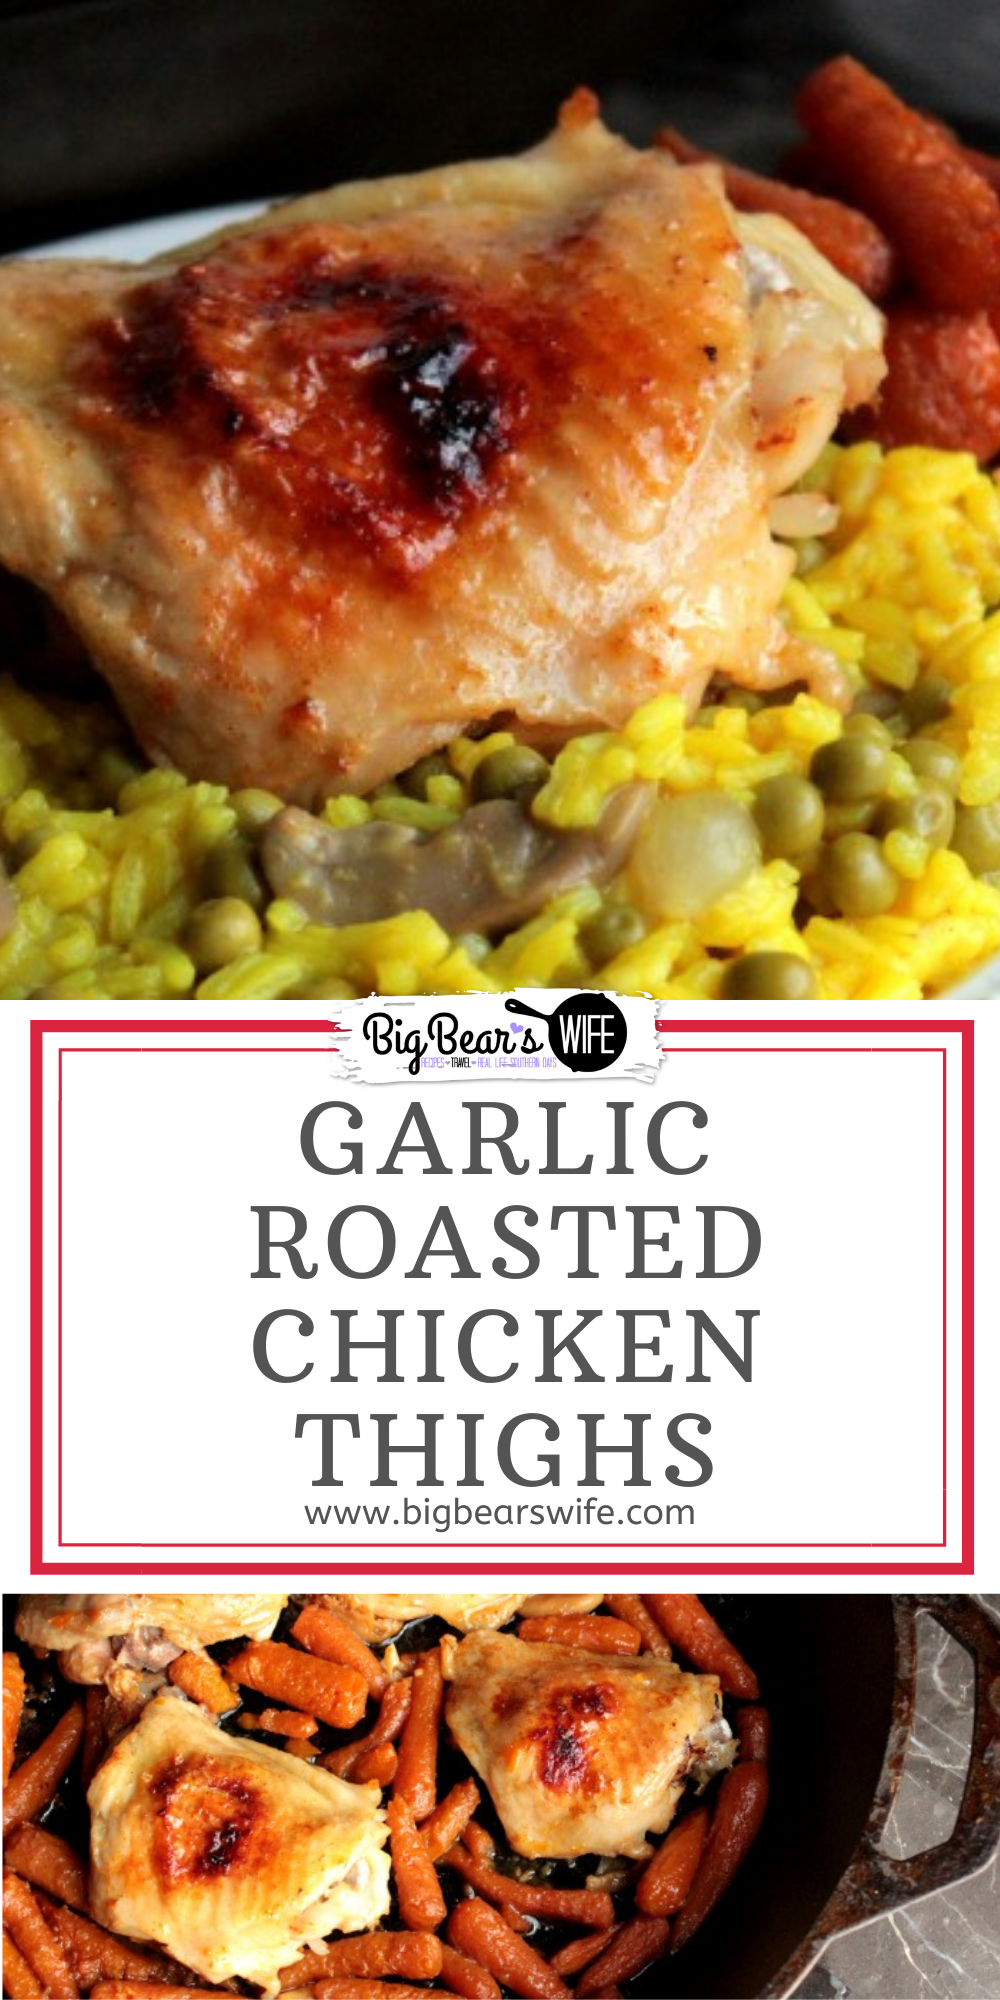 These Garlic Roasted Chicken Thighs are rubbed with minced garlic, cooked low and slow for the juiciest chicken thighs you’ve ever tasted! This is one of the best chicken thigh recipes that I make for our family.

 via @bigbearswife